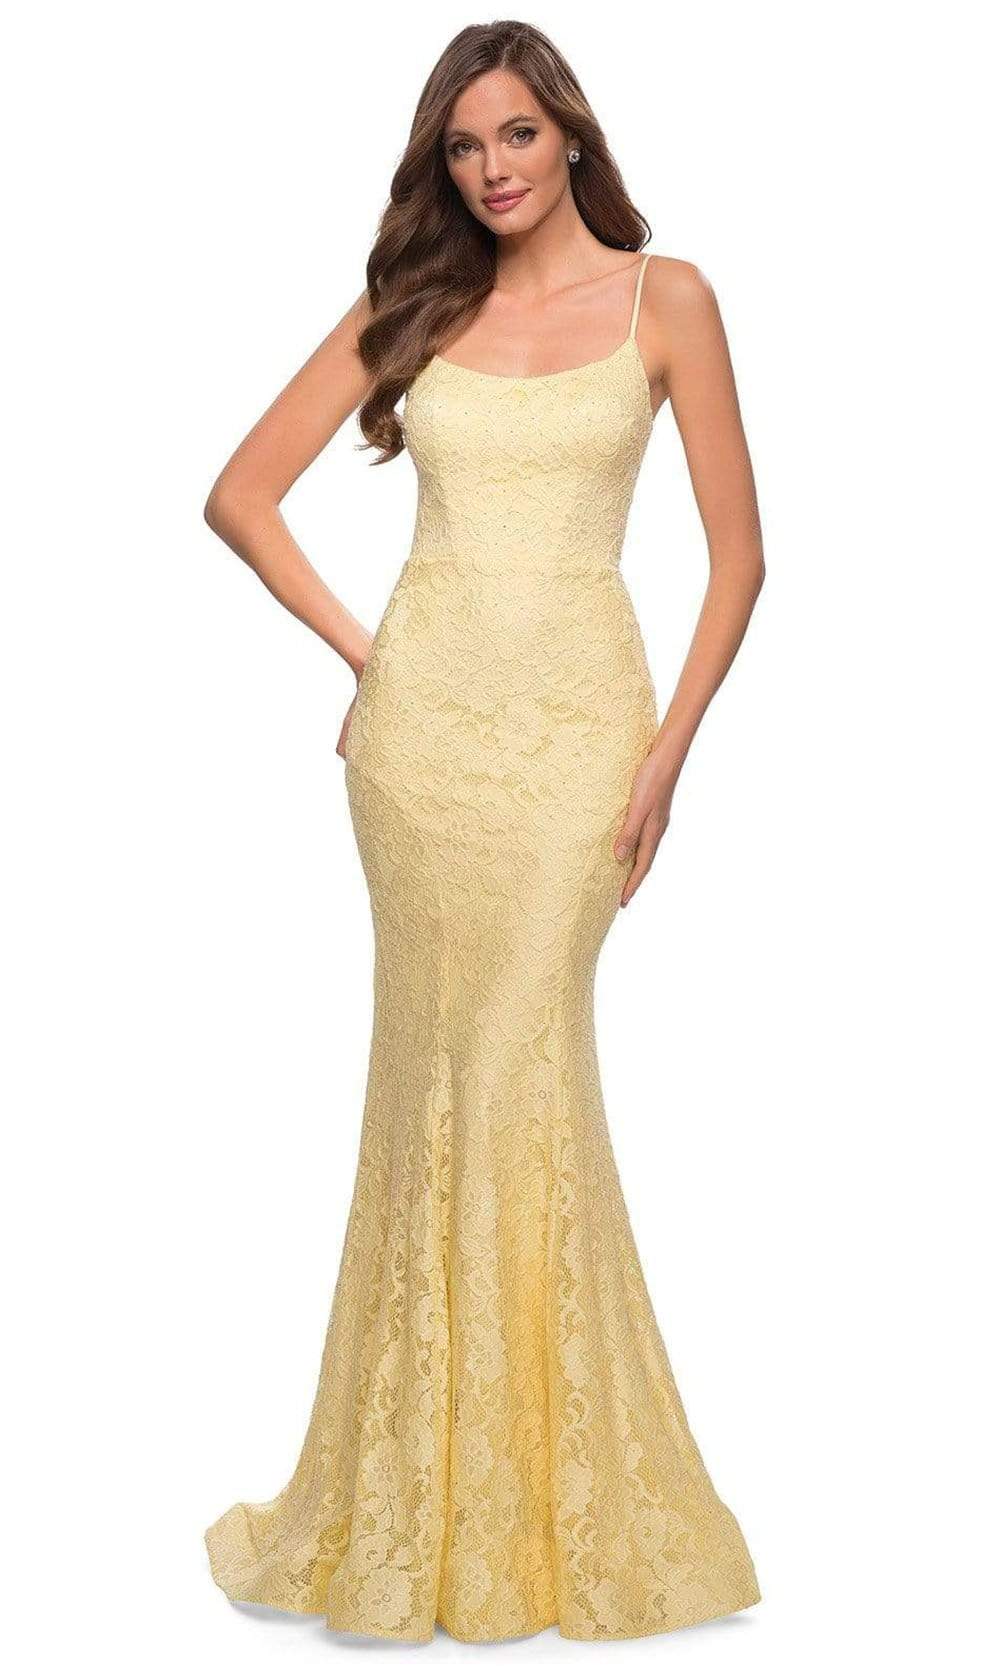 La Femme - 29611 Spaghetti Strap Full Lace Mermaid Gown Special Occasion Dress 00 / Pale Yellow